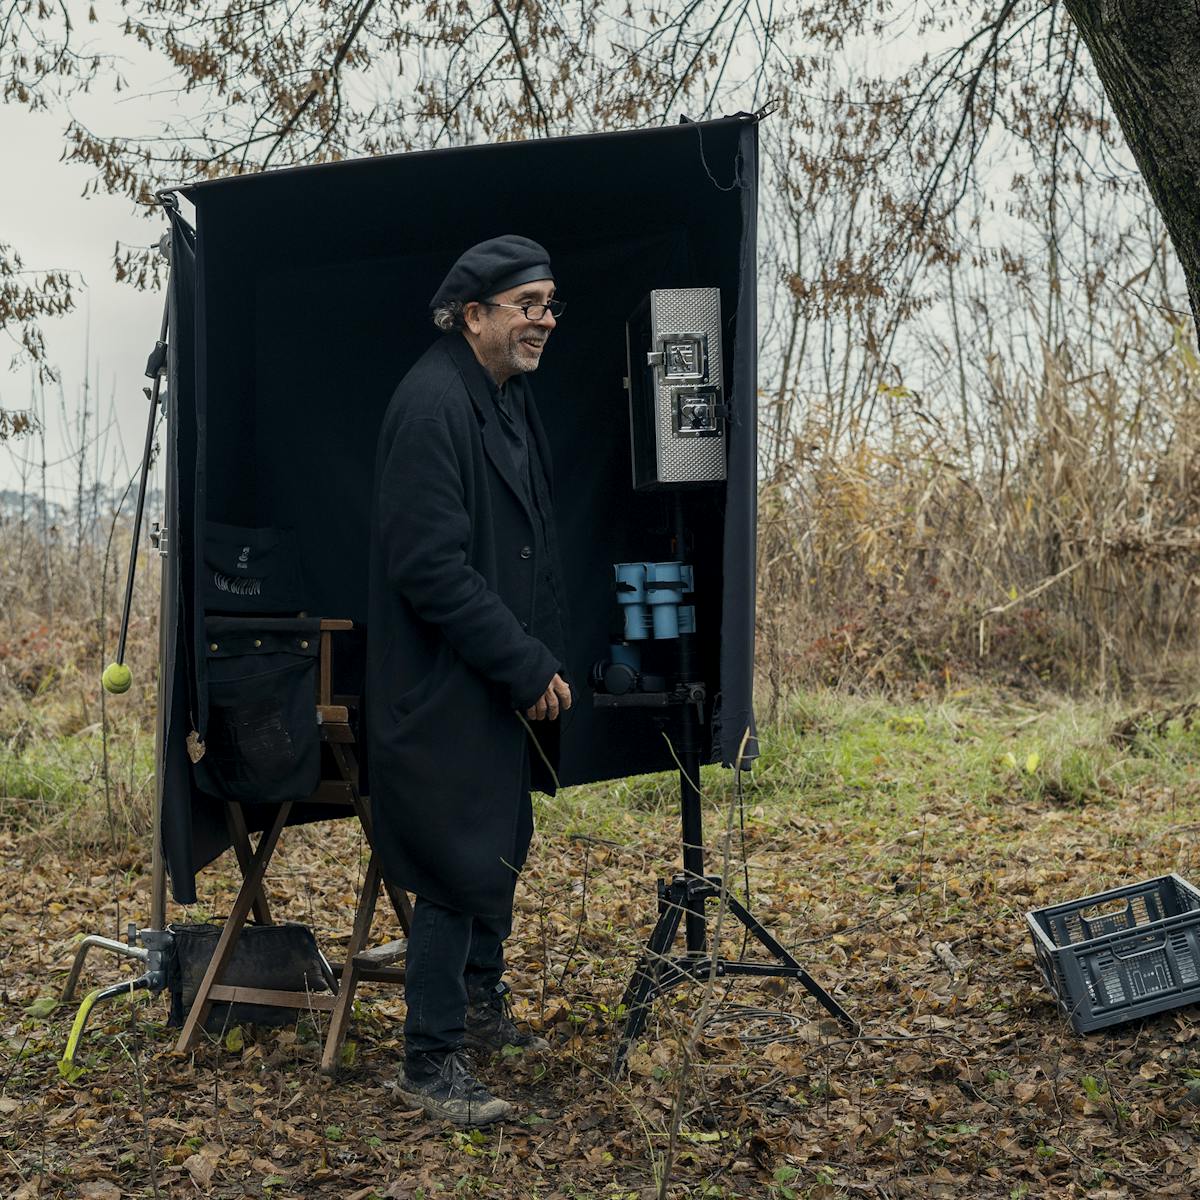 Tim Burton wears all black and stands in an autumnal setting next to some filming equipment. 